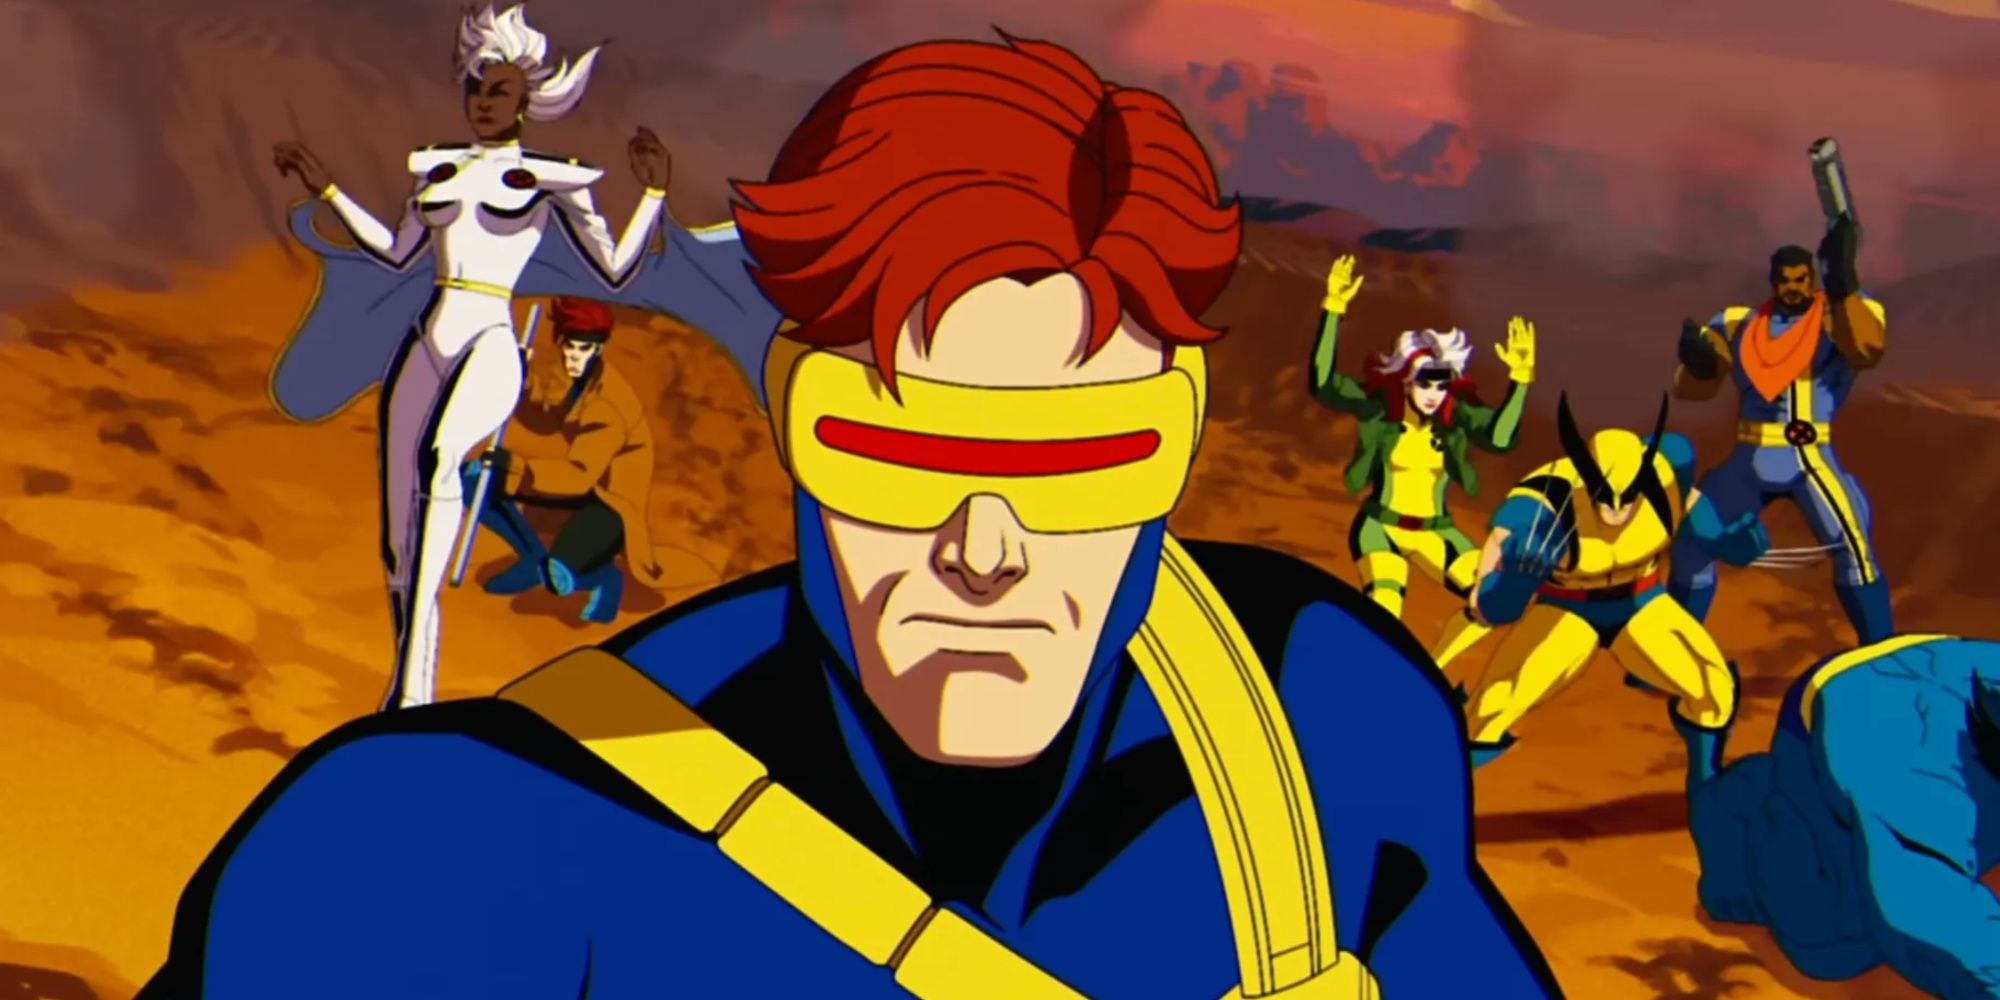 X-Men 97 image showing Cyclops, Storm, and the rest of the team